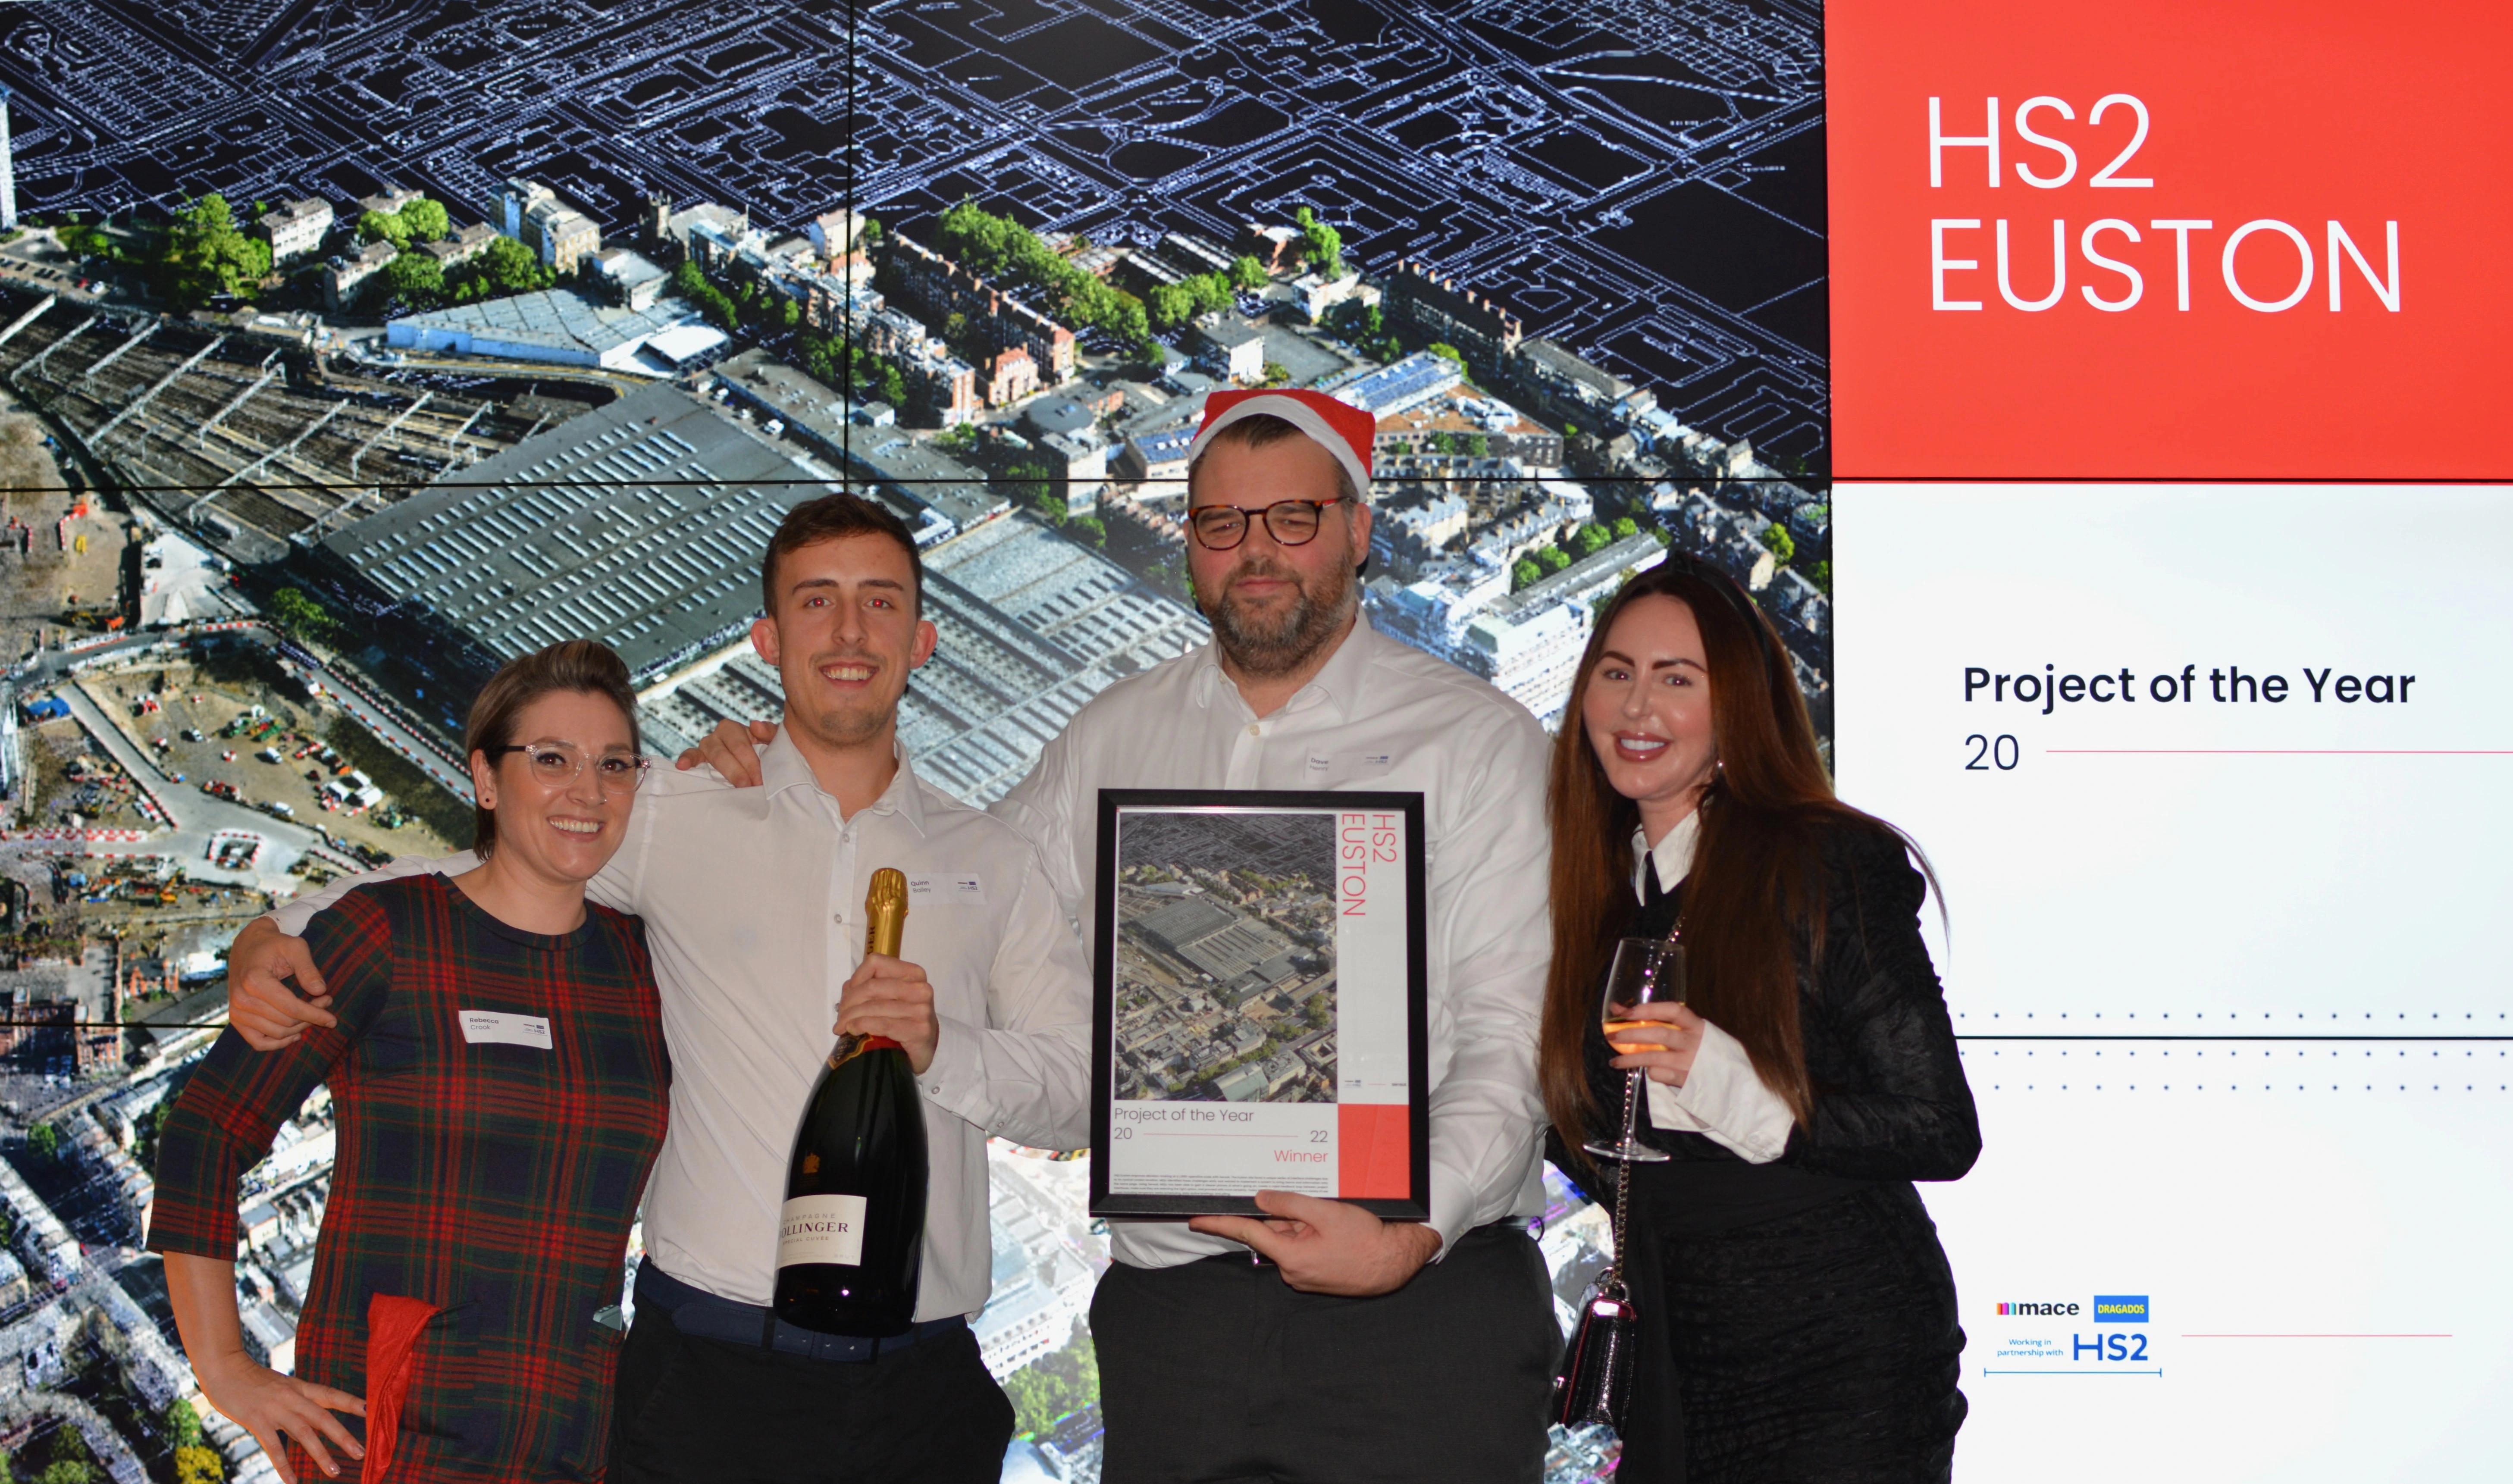 HS2 Euston win Project of the Year at Sensat's User Awards